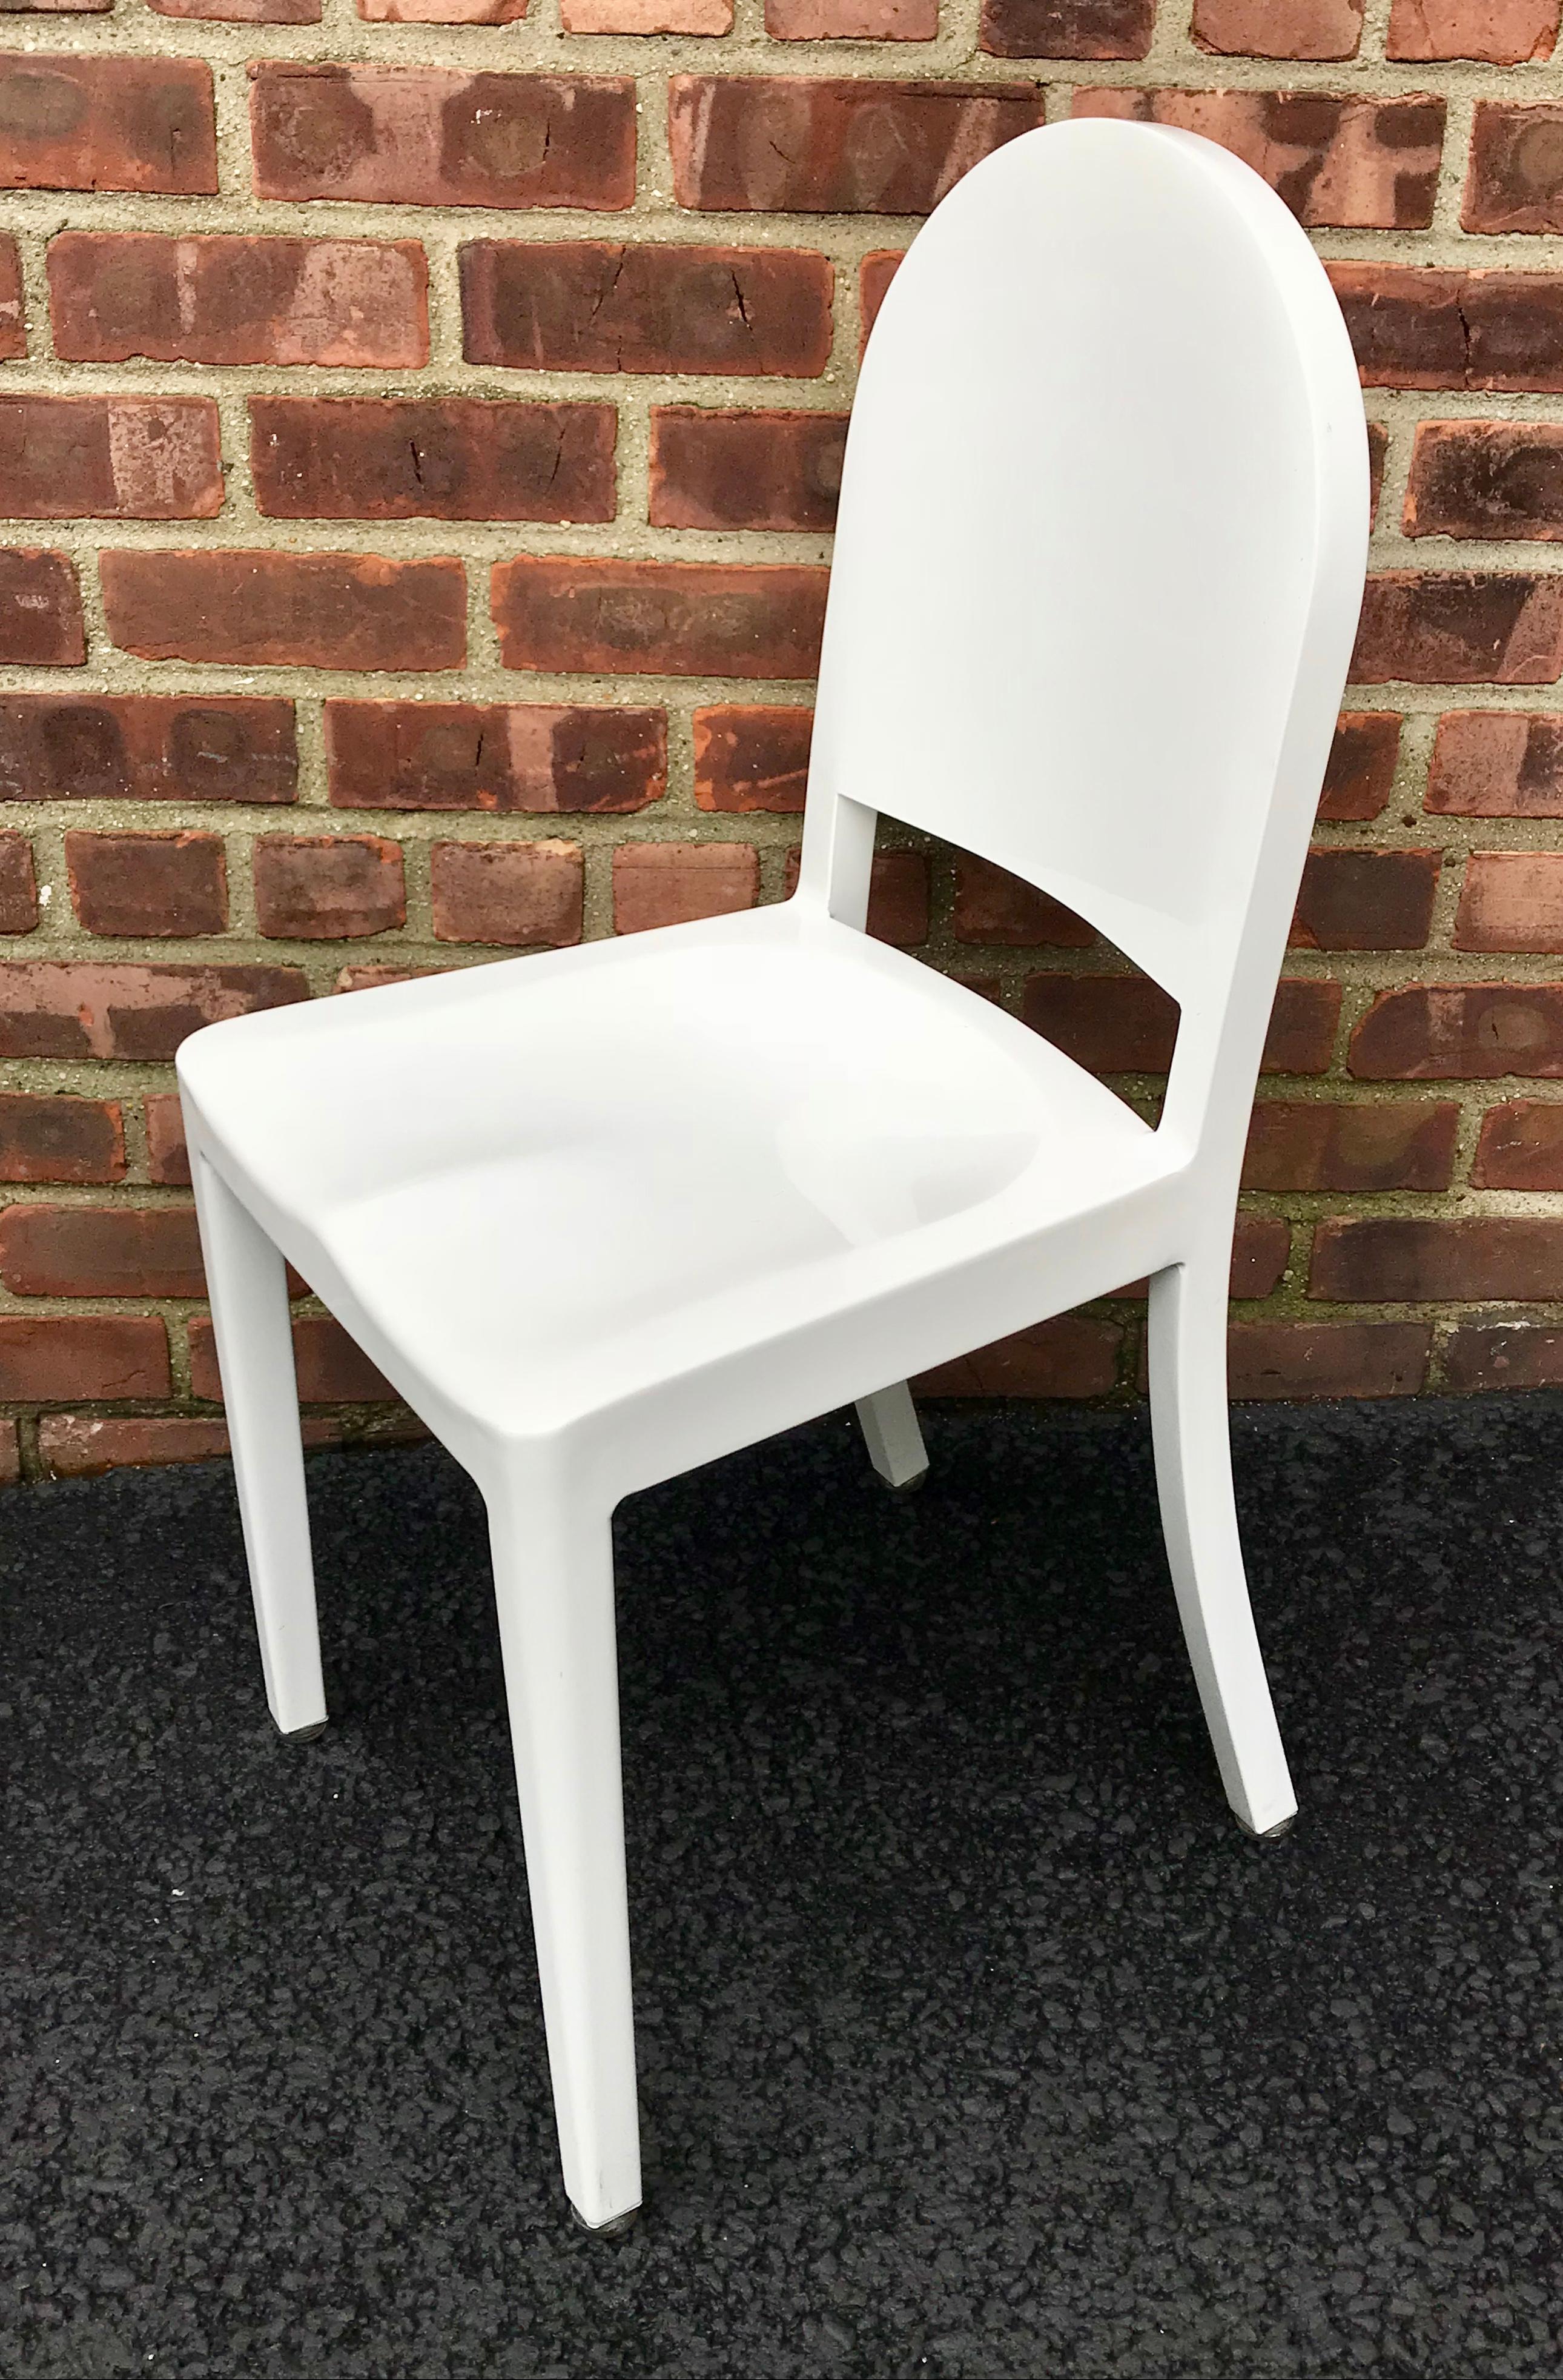 Modern Set of 16 White High Gloss Aluminum Dining Chairs by Andrée Putman for Emeco